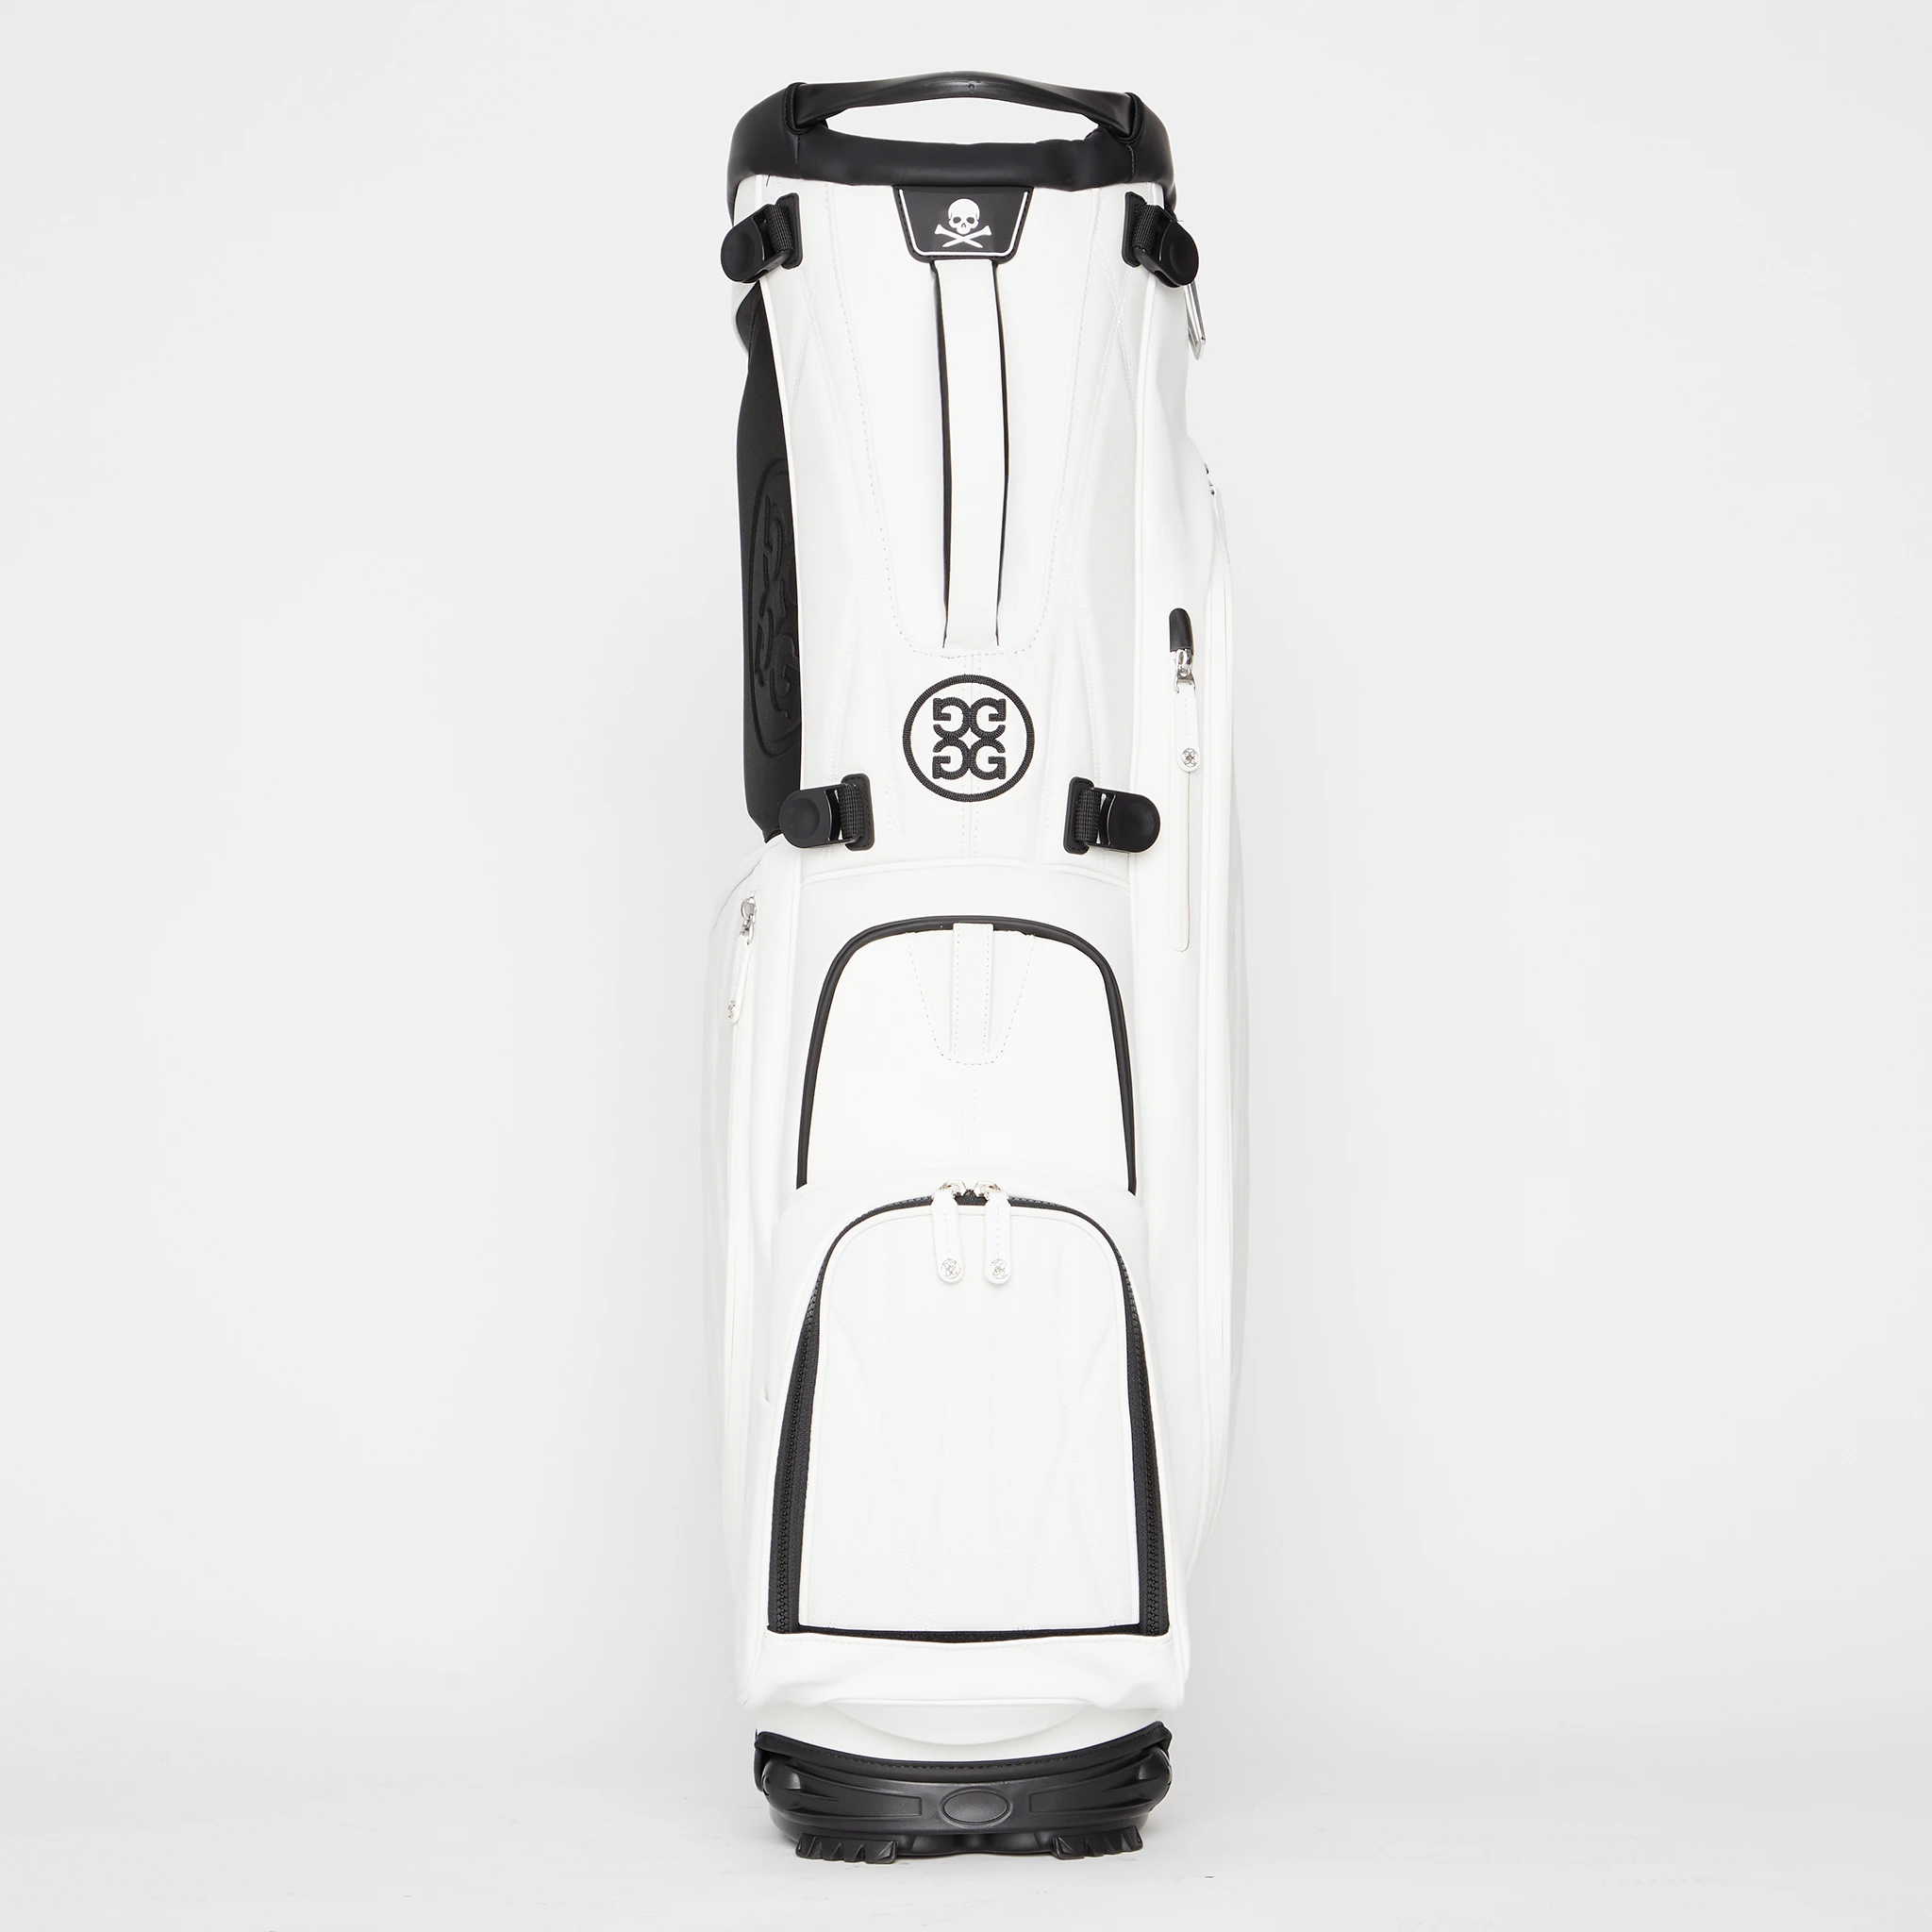 UNISEX TRANSPORTER TOUR CARRY GOLF BAG / G/FORE（ジーフォア）の